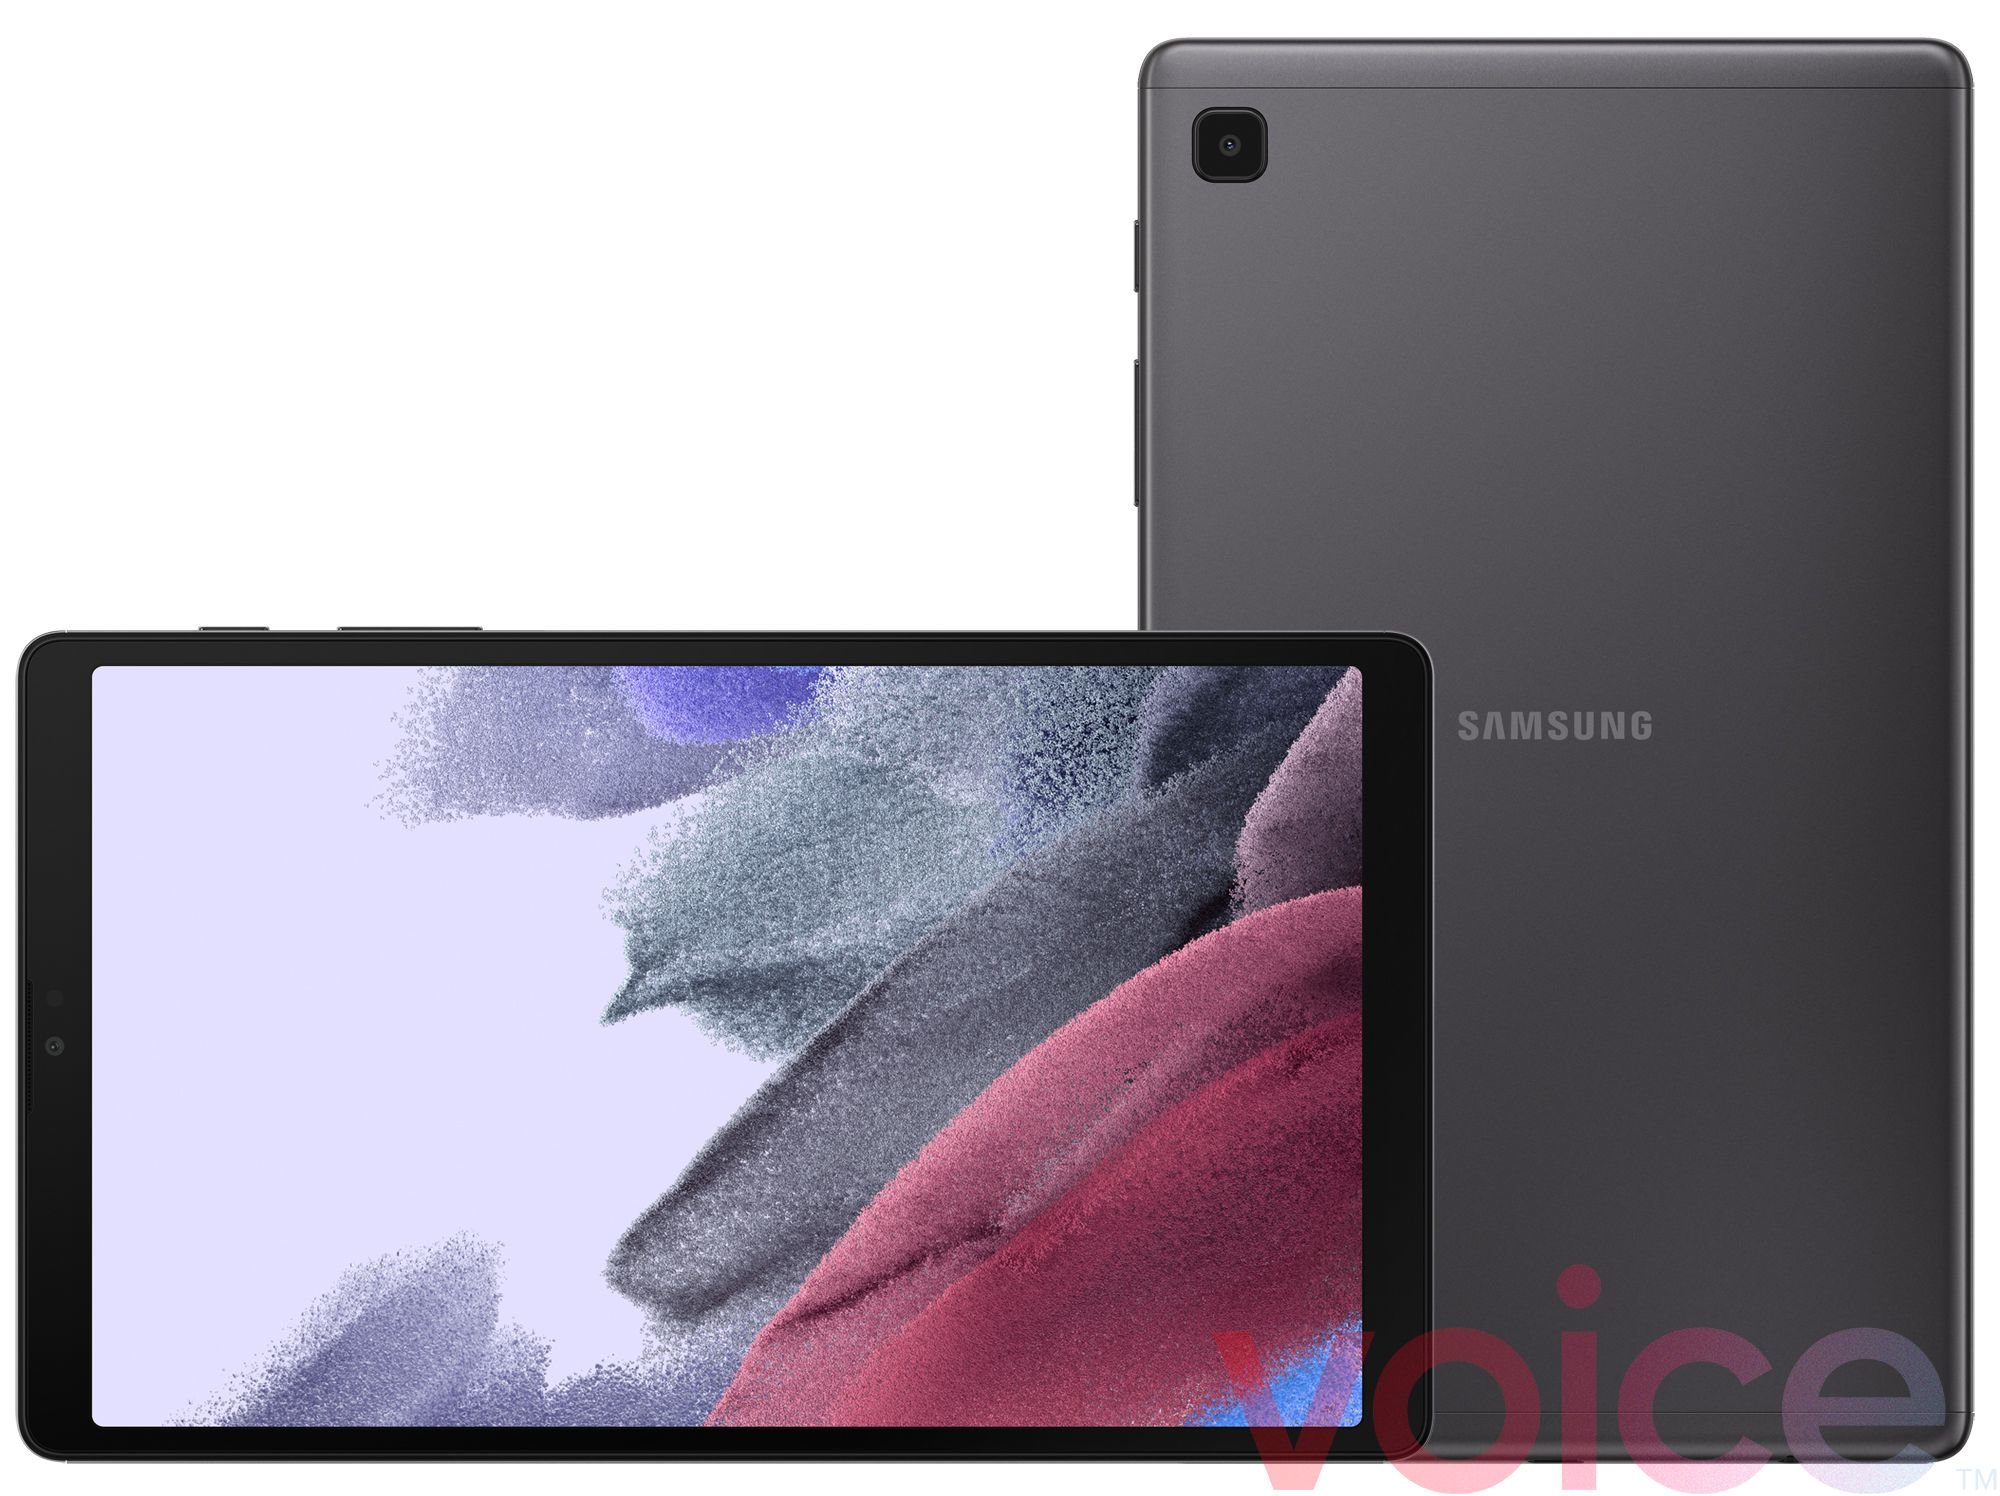 Samsung Galaxy Tab A7 Lite expected to launch soon